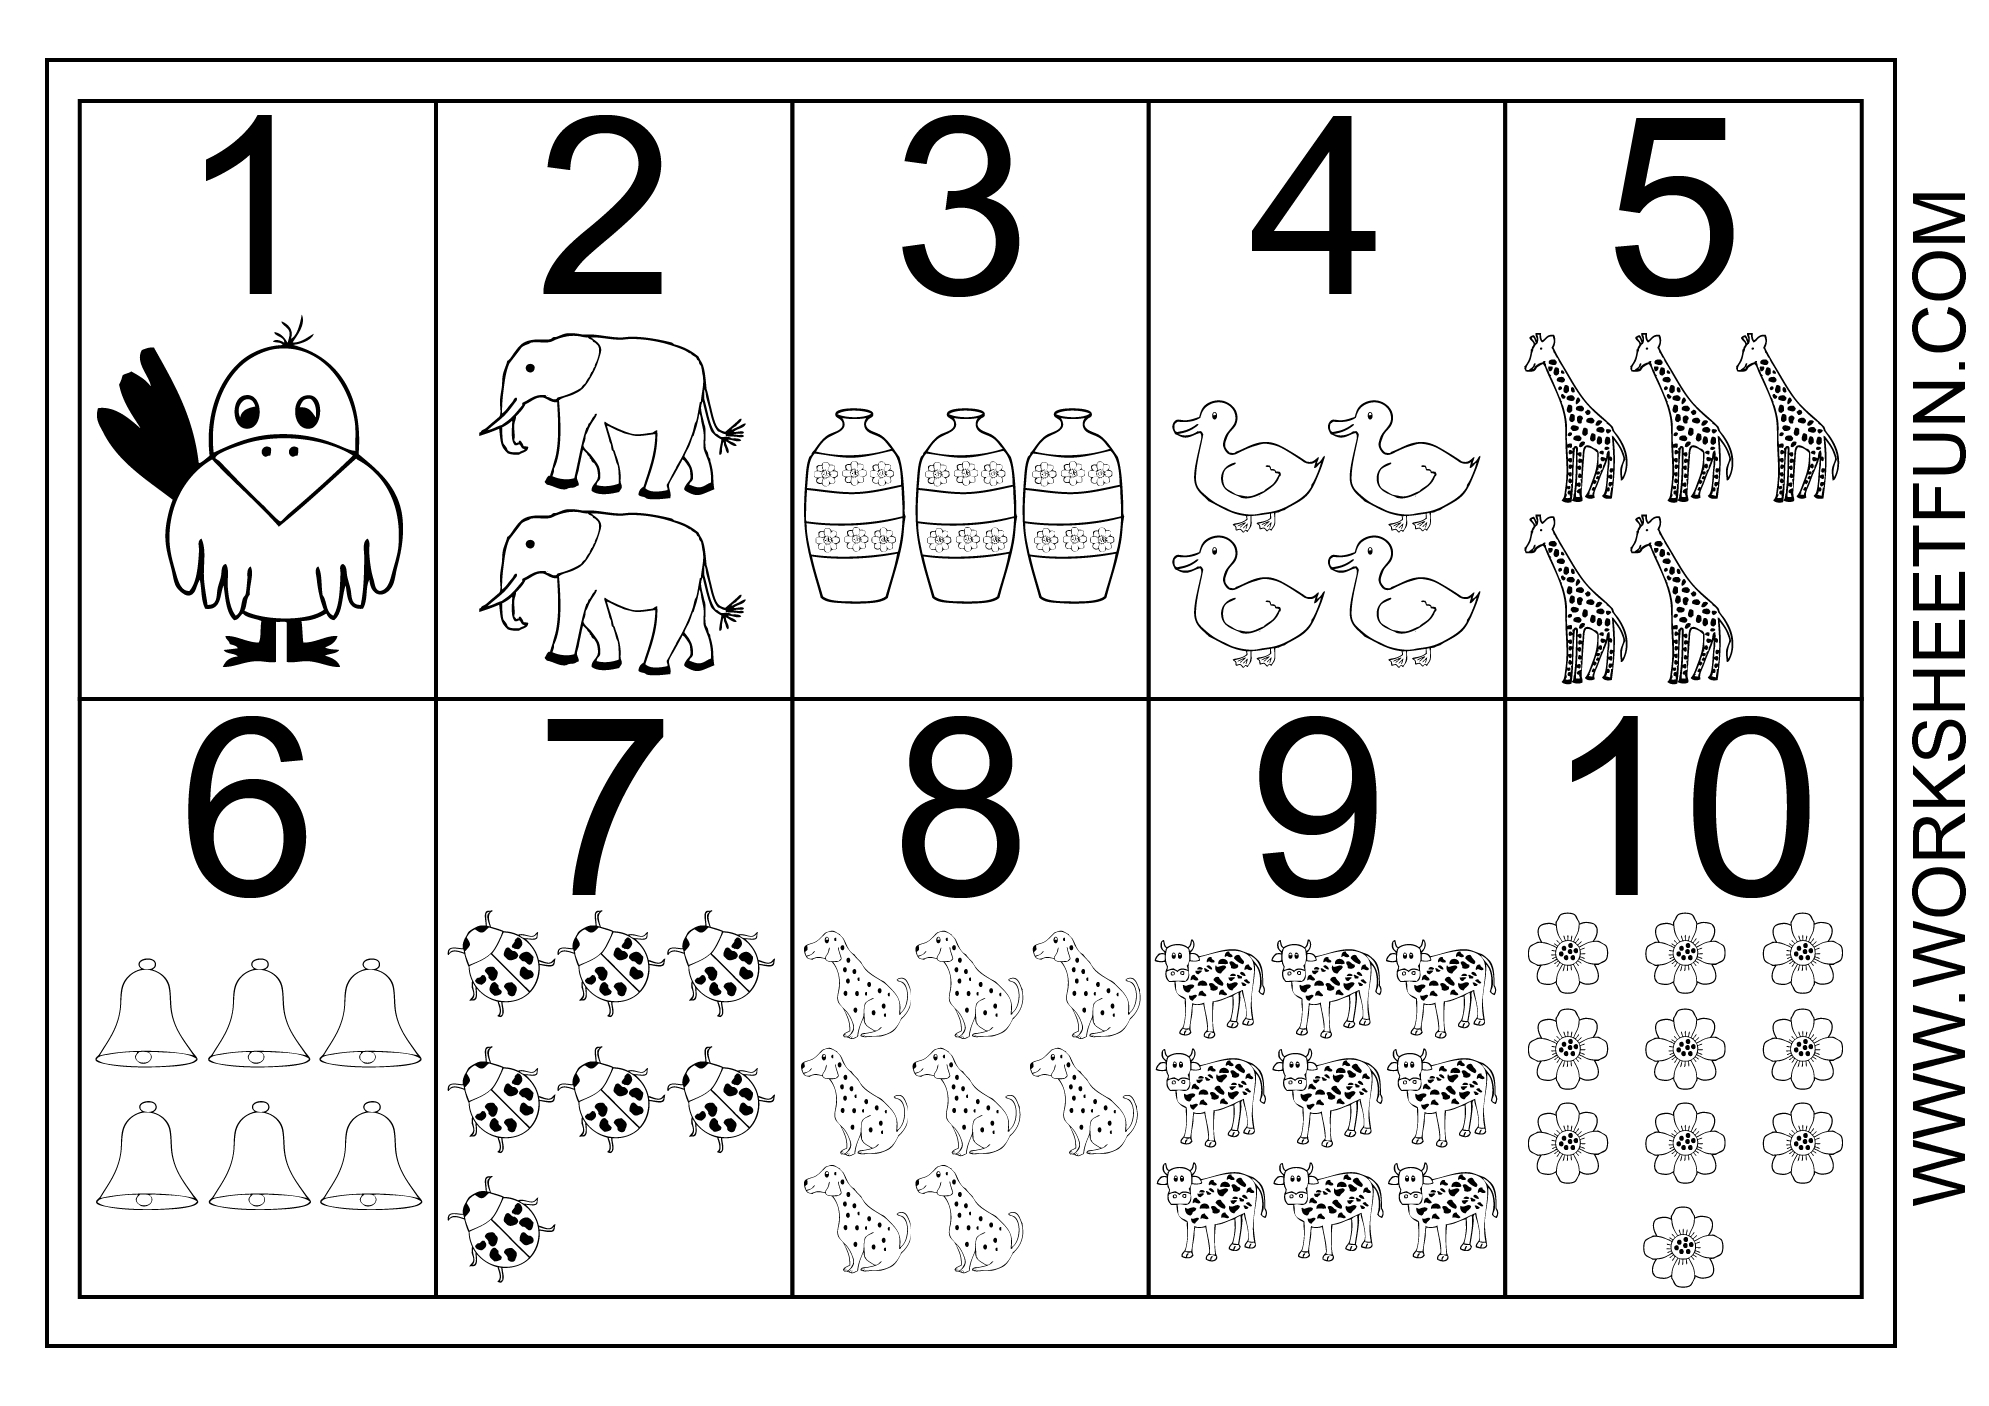 Picture Number Chart 1-10 | Printable Worksheets | Numbers Preschool - Free Printable Number Chart 1 10